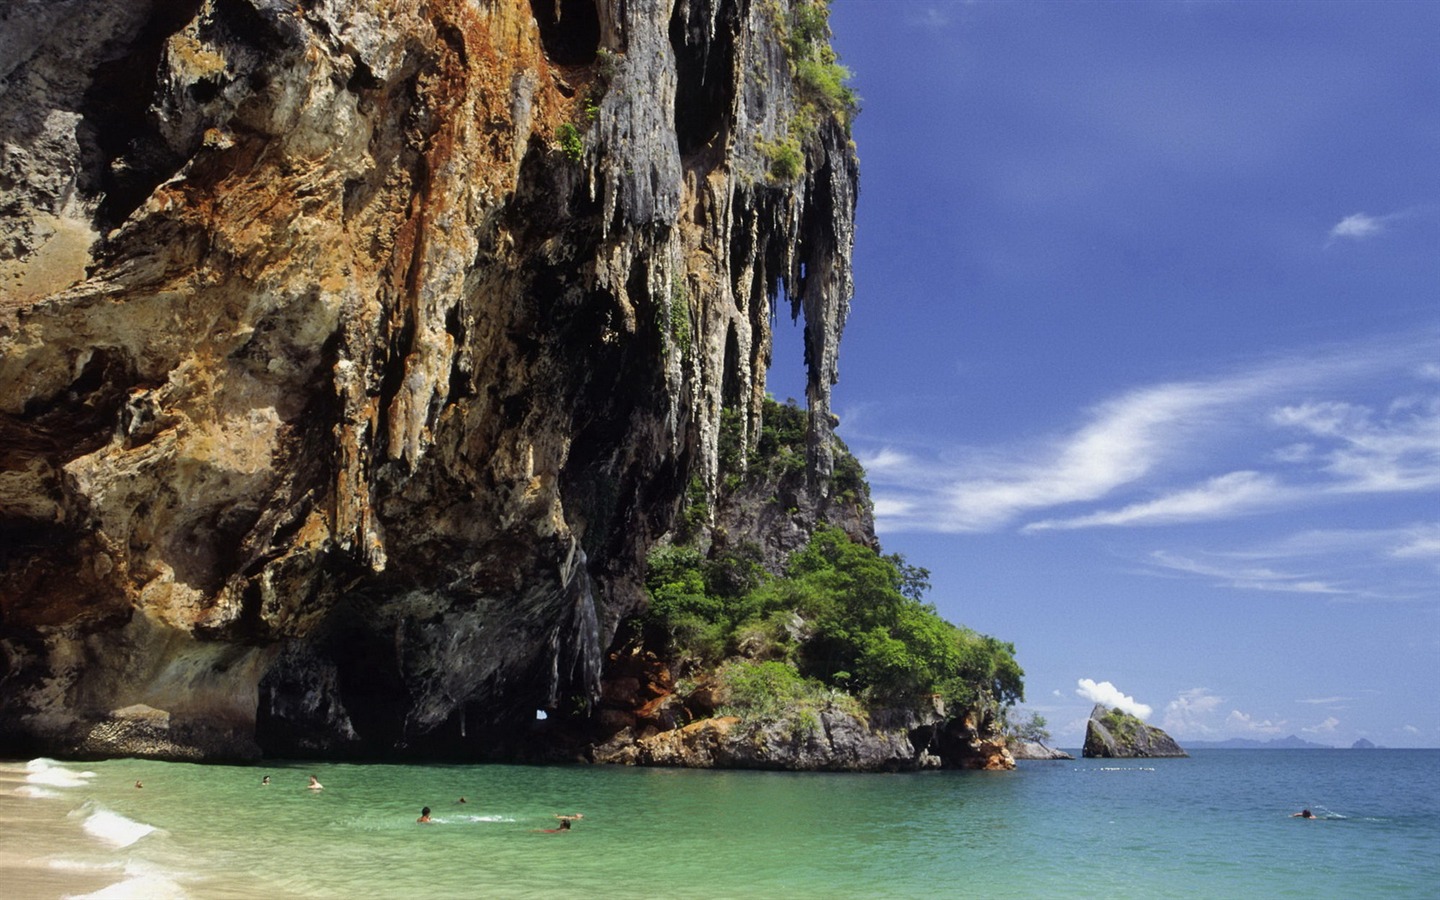 Thailand's natural beauty wallpapers #8 - 1440x900